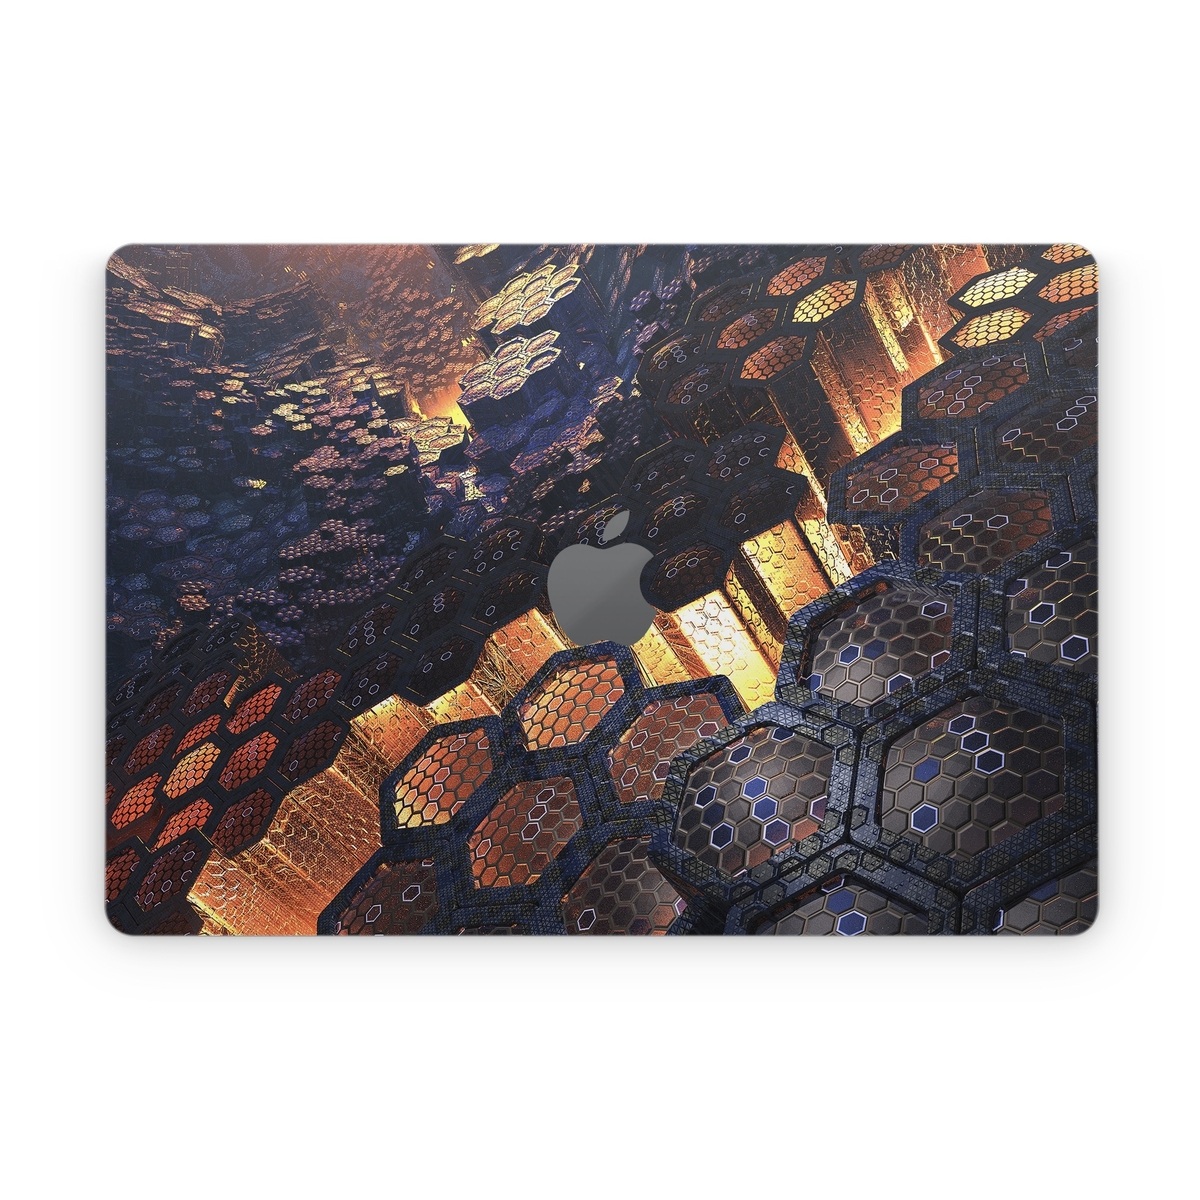 Apple MacBook Skin design of Geological phenomenon, Sky, Water, Cobblestone, Rock, Reflection, Colorfulness, World, Art, with black, red, green colors